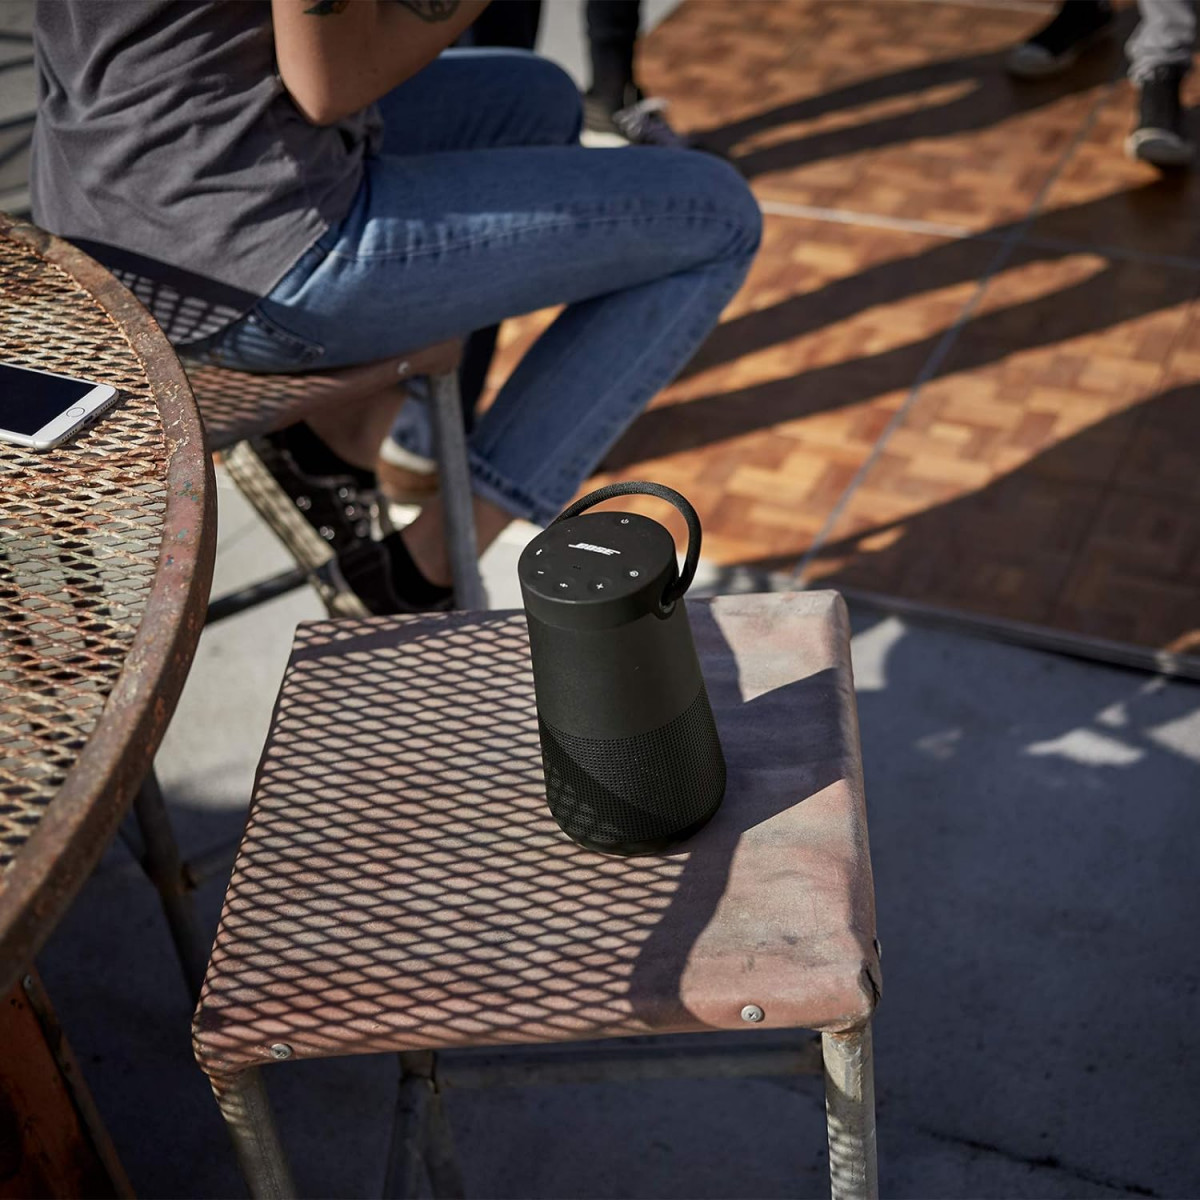 Bose SoundLink RevolveSeries II Portable and Long-Lasting Bluetooth Speaker with 360 Wireless Surround Sound 17 Hours of Battery Life Water and Dust Resistant Triple Black